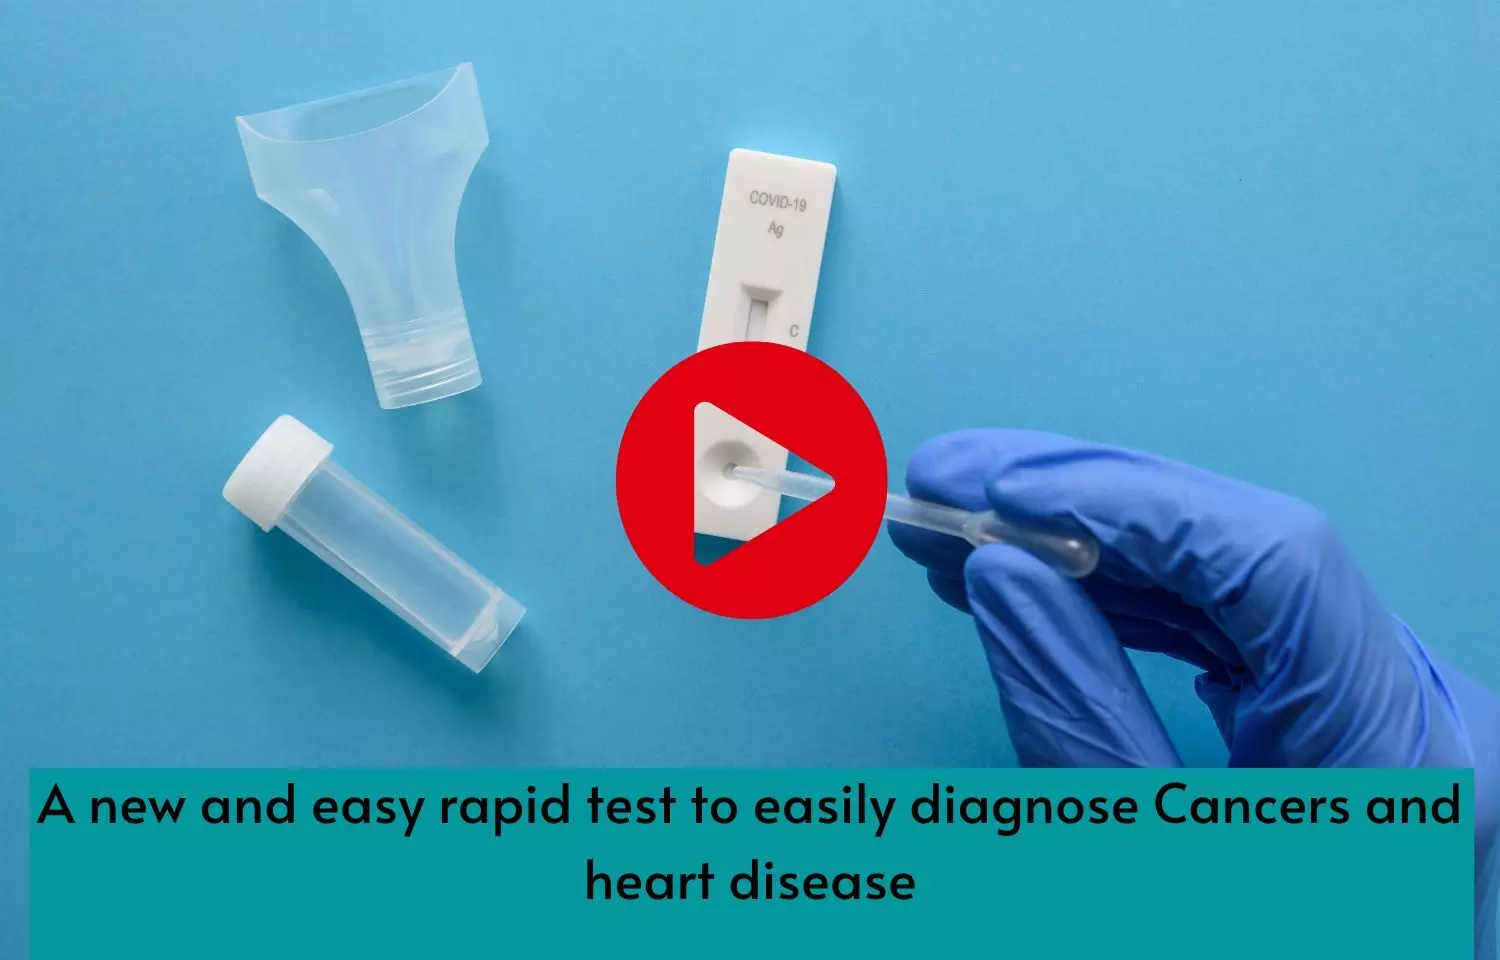 A new and easy rapid test to easily diagnose Cancers and heart disease